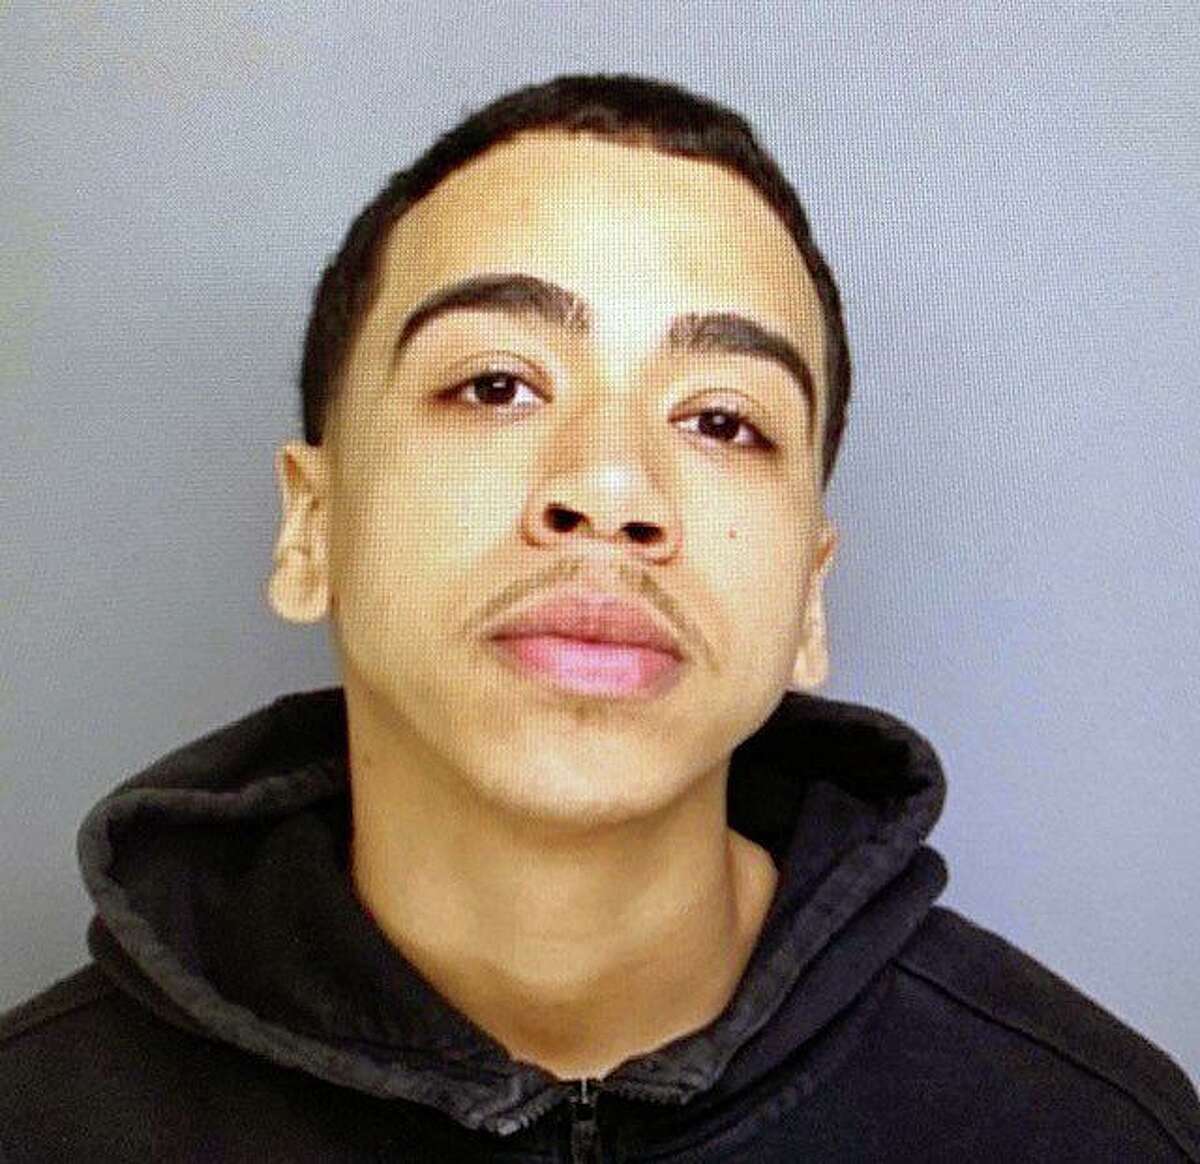 Vaughn Thomas Jr., 20, of Nelson Terrace in Bridgeport, Conn., was charged May 15, 2019, with felony murder, conspiracy to commit first degree robbery, first-degree robbery, carrying a pistol without a permit and illegal discharge of a firearm. Now he faces additional federal charges.